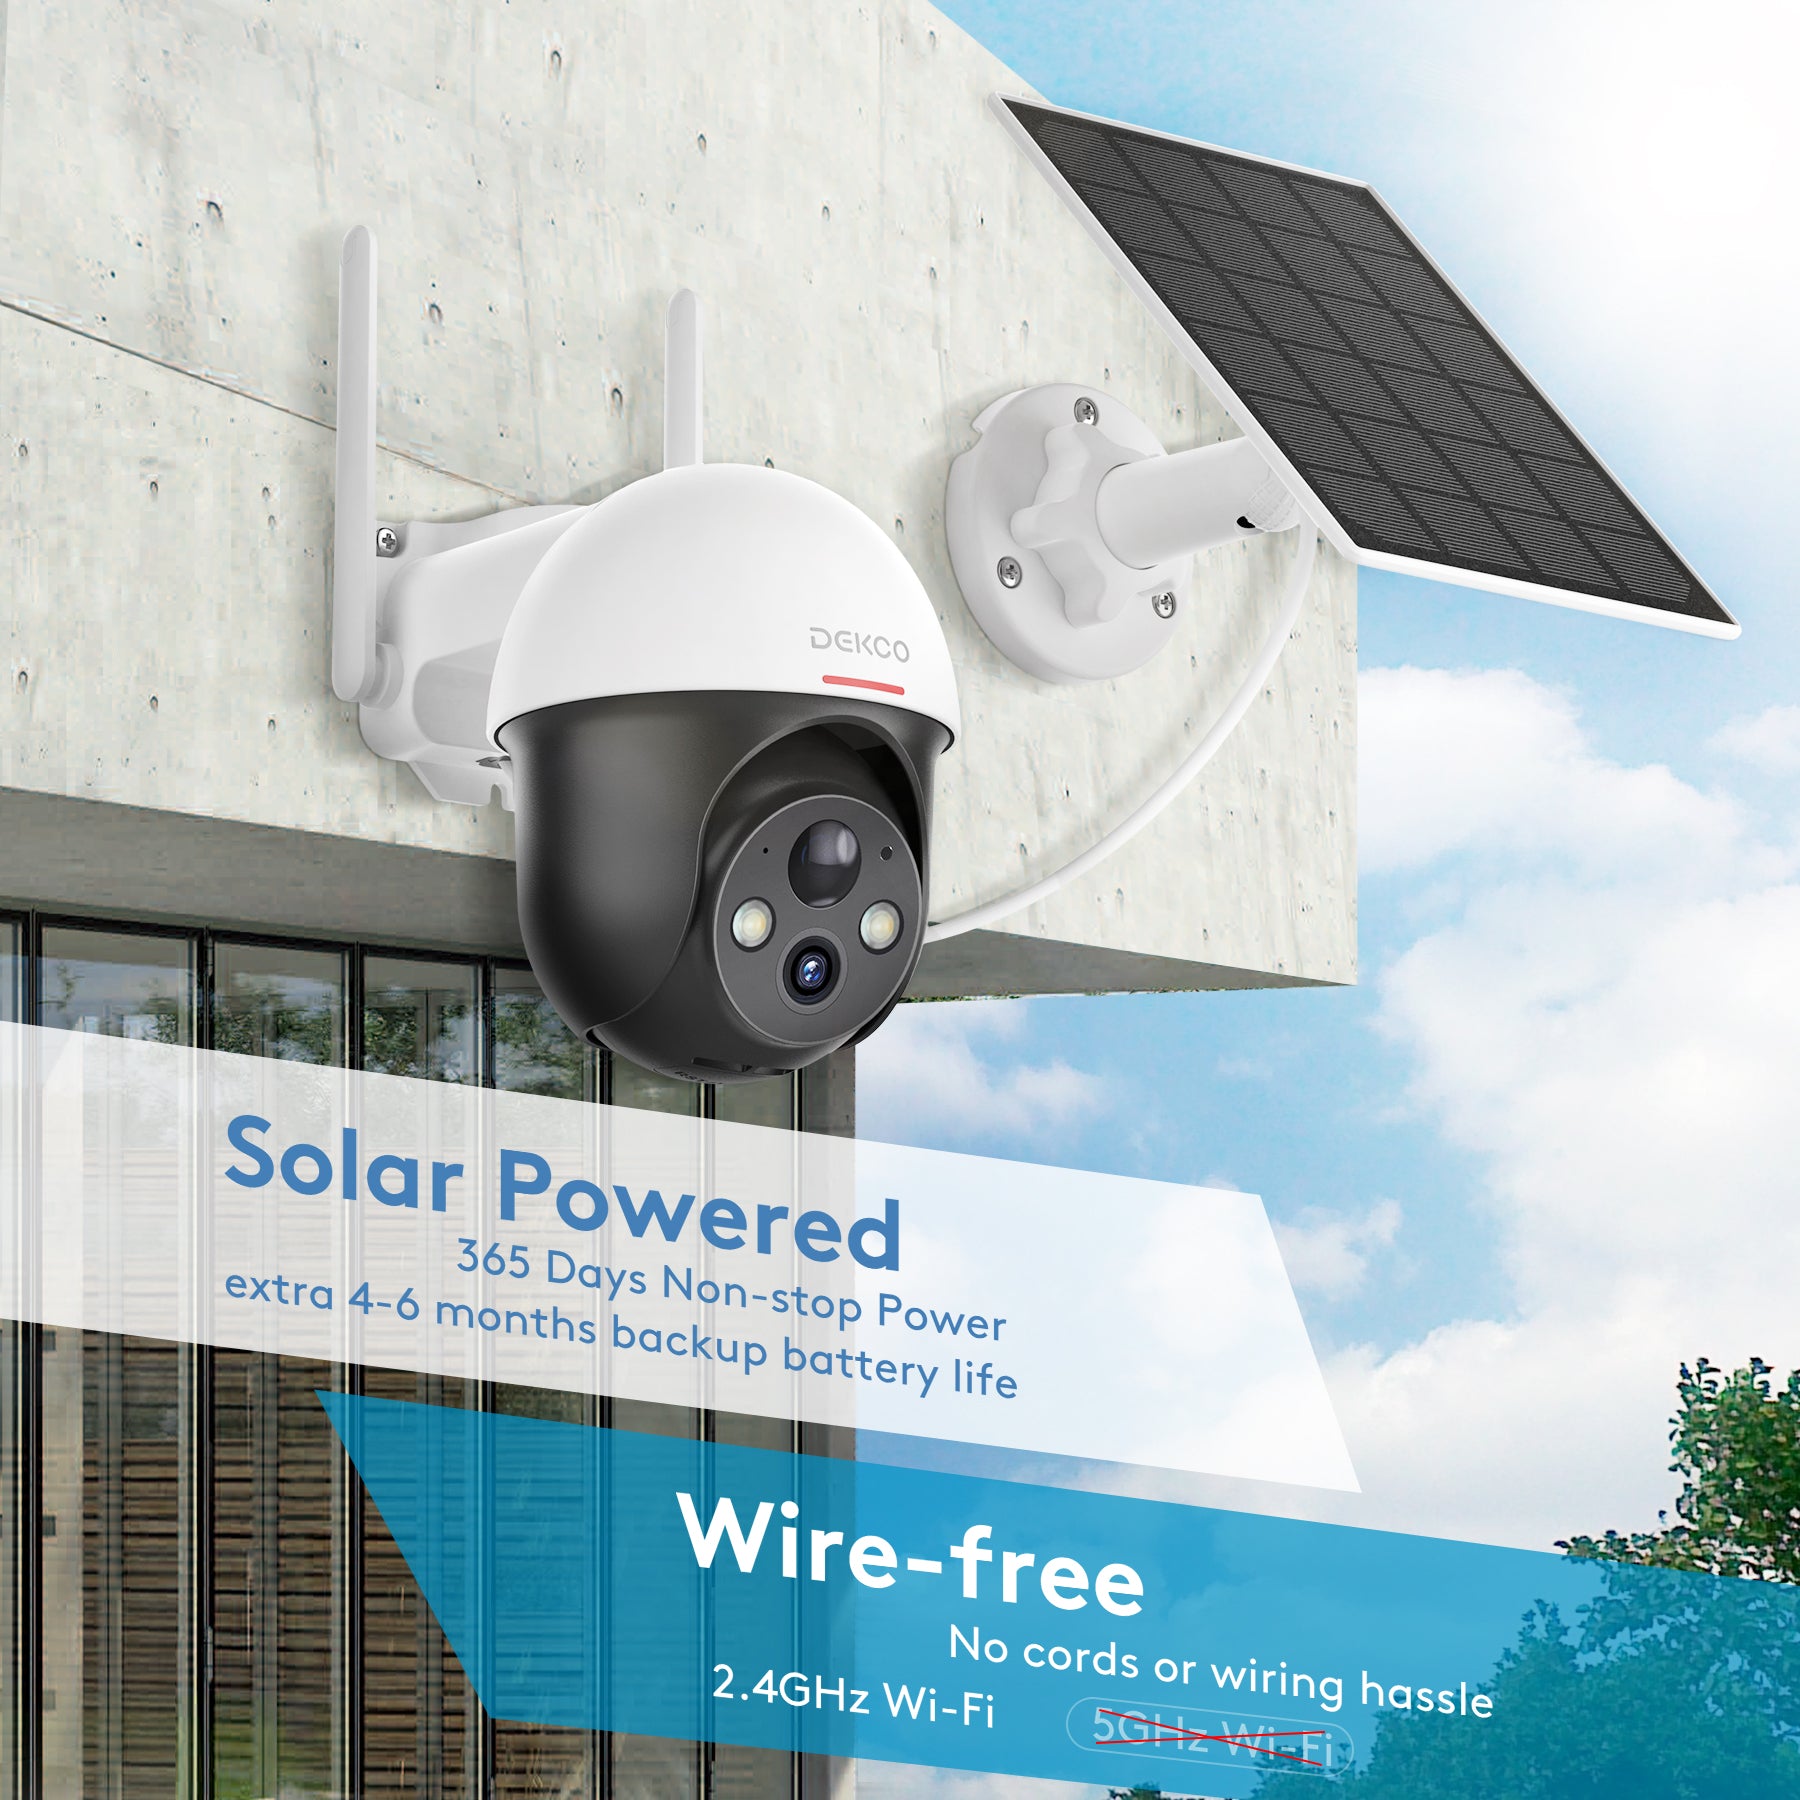 DEKCO 2K Solar Security Camera Wireless Outdoor, 360 Degree Rotating Pan Tilt, Light and Sound Alarm, Night Vision, Motion Detection, and 2 Way Audio